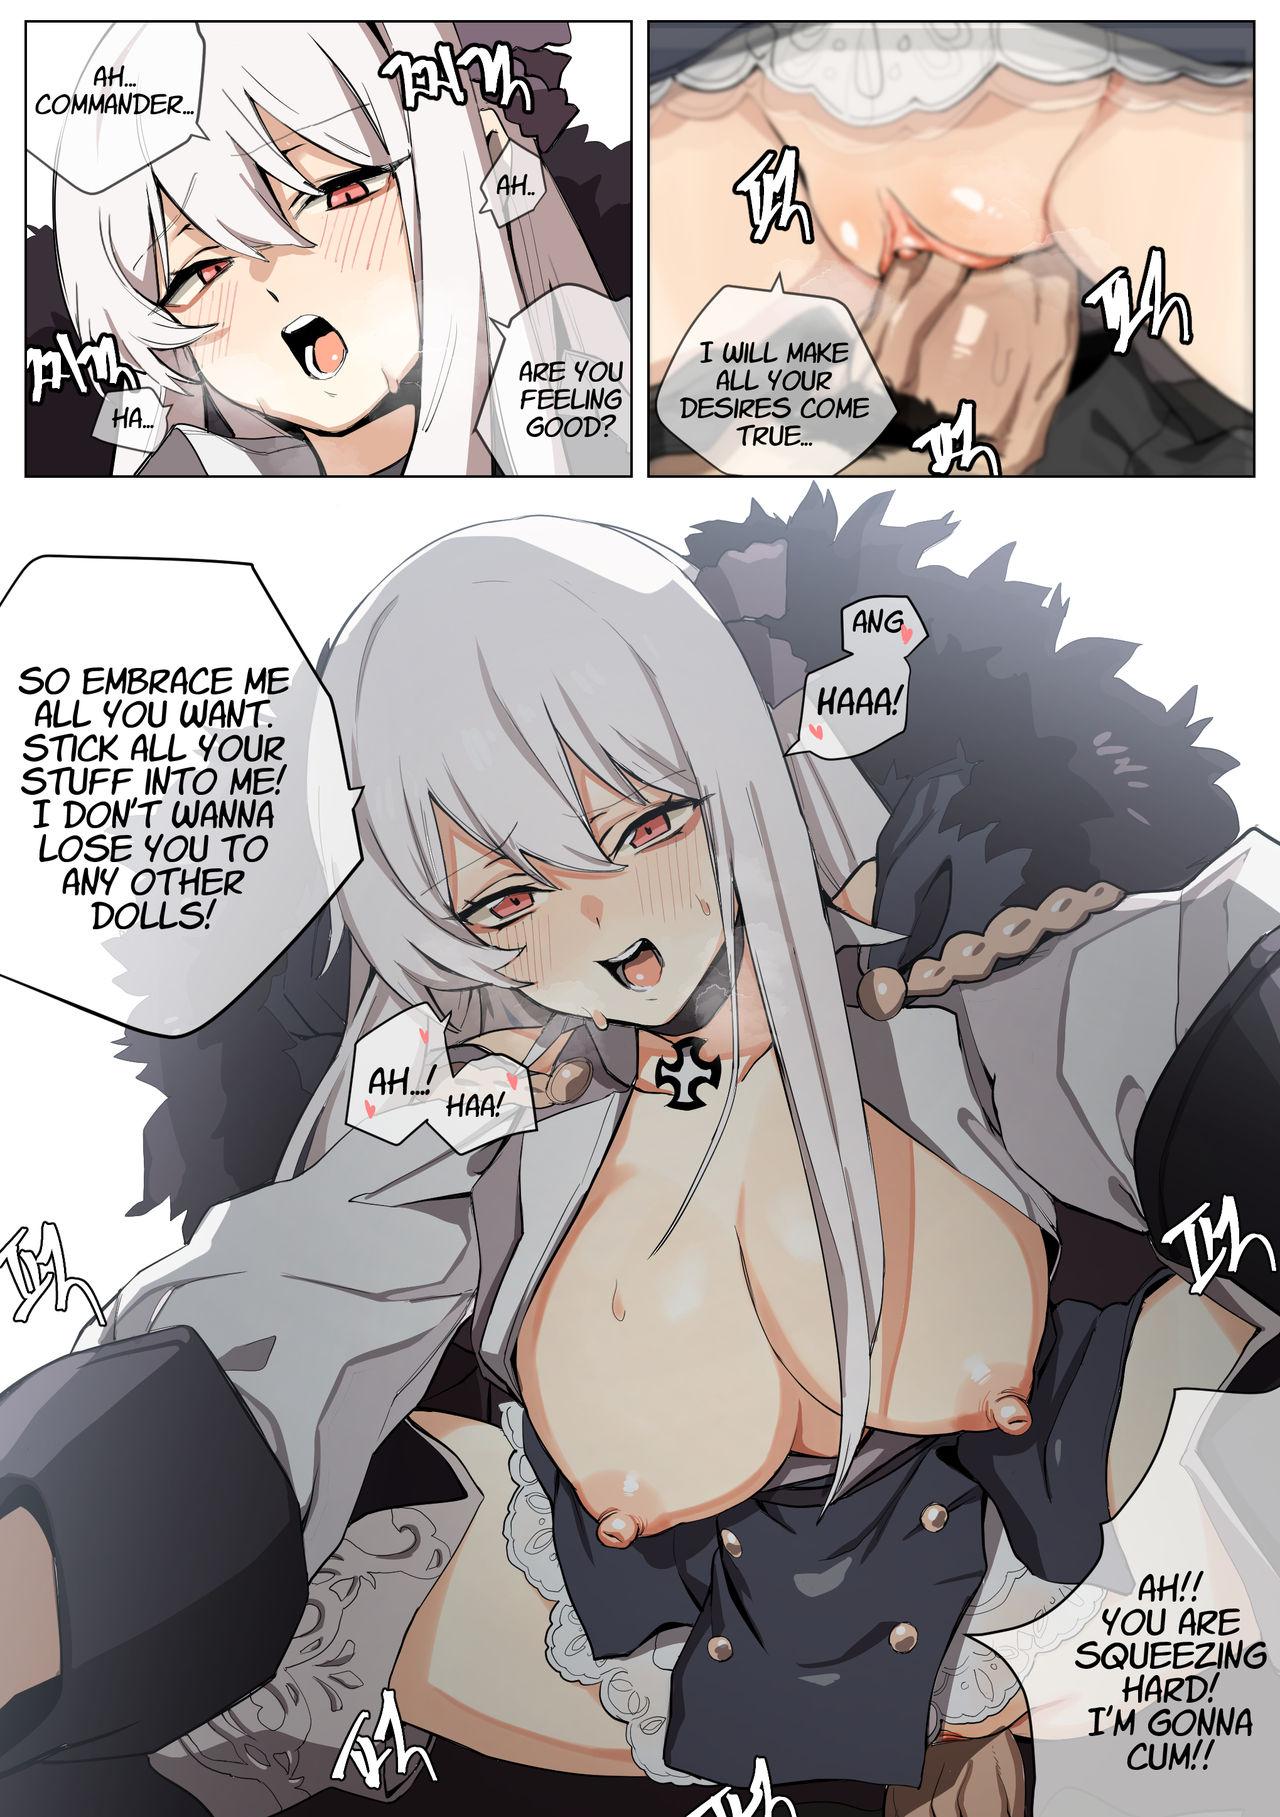 Argentino Hobby - Girls frontline Amature Porn - Page 15